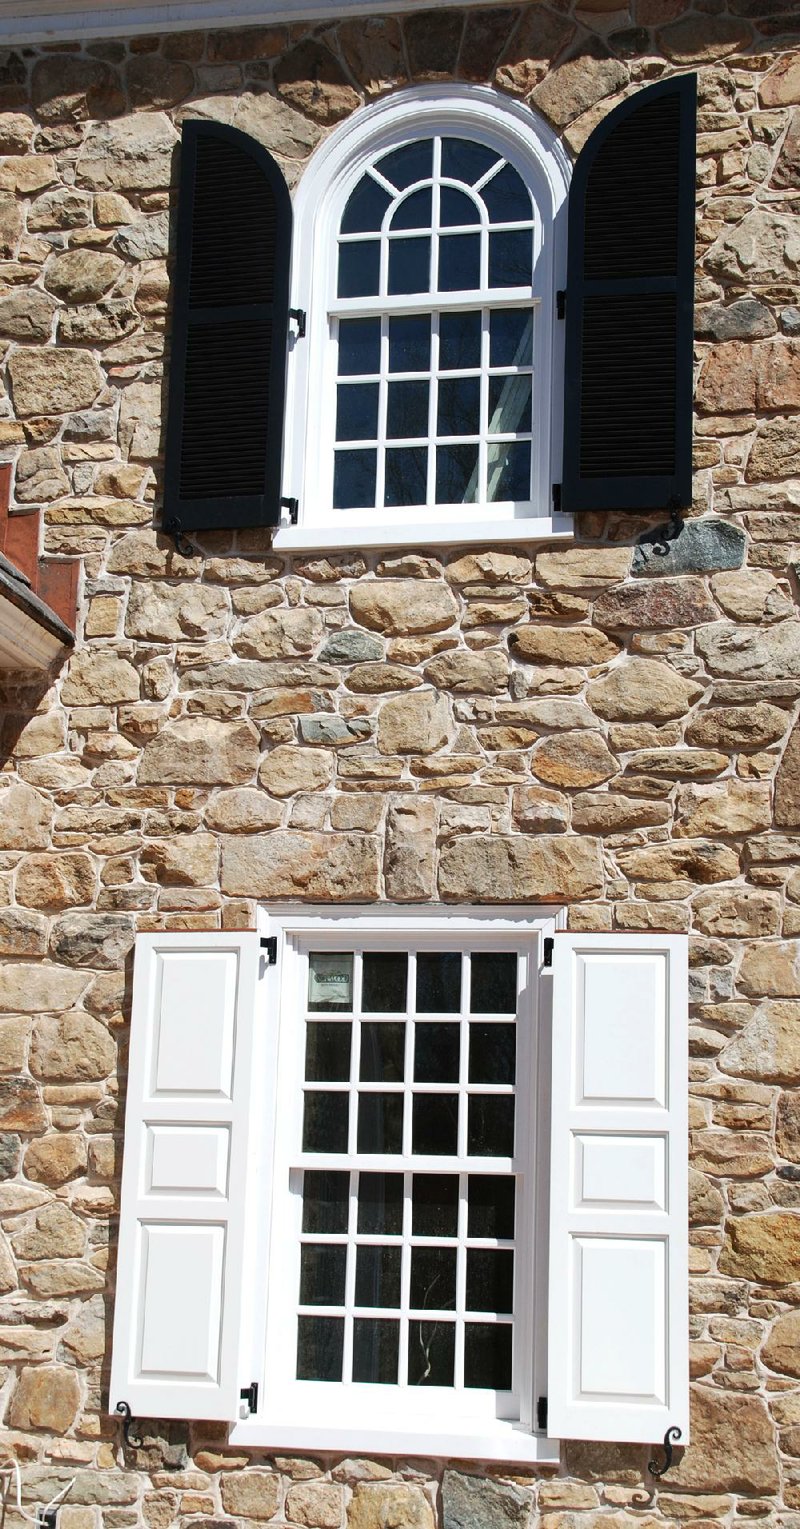 Homeowners often choose the wrong shape of shutters for arched windows. The shutters must be the right shape and size so that they will meet in the middle of the window and completely cover the opening.